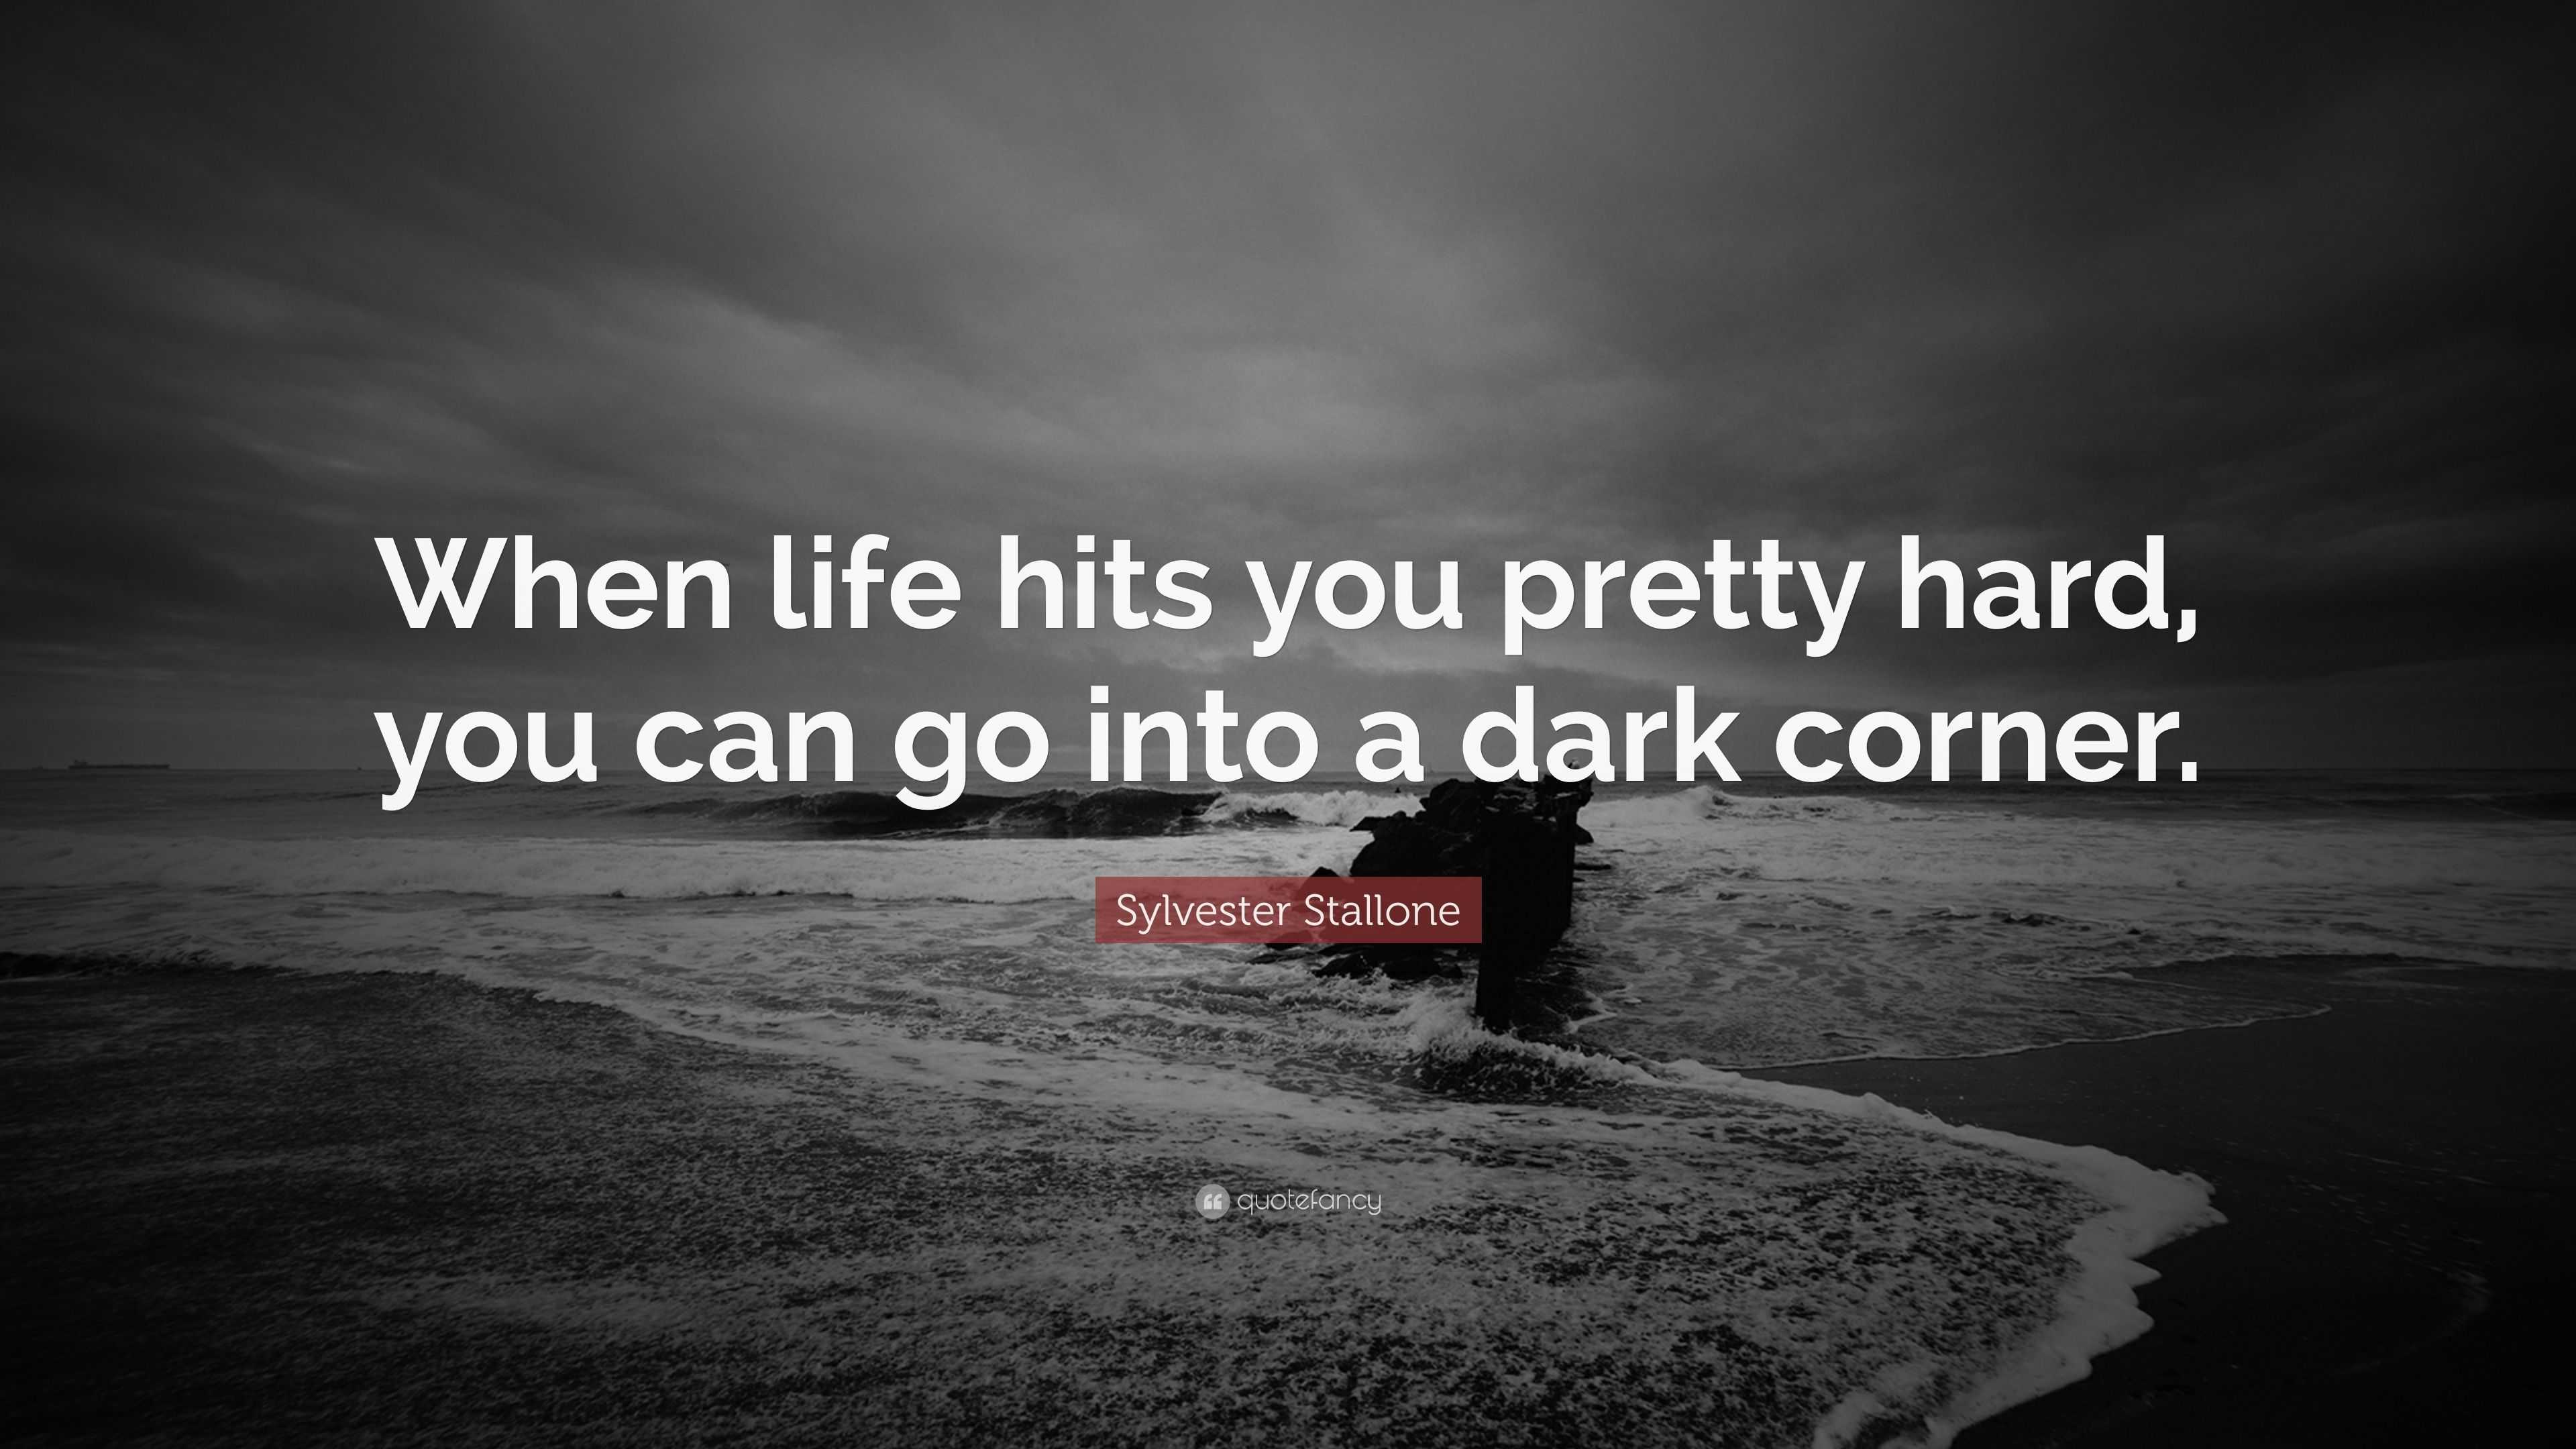 Sylvester Stallone Quote: “When life hits you pretty hard, you can go